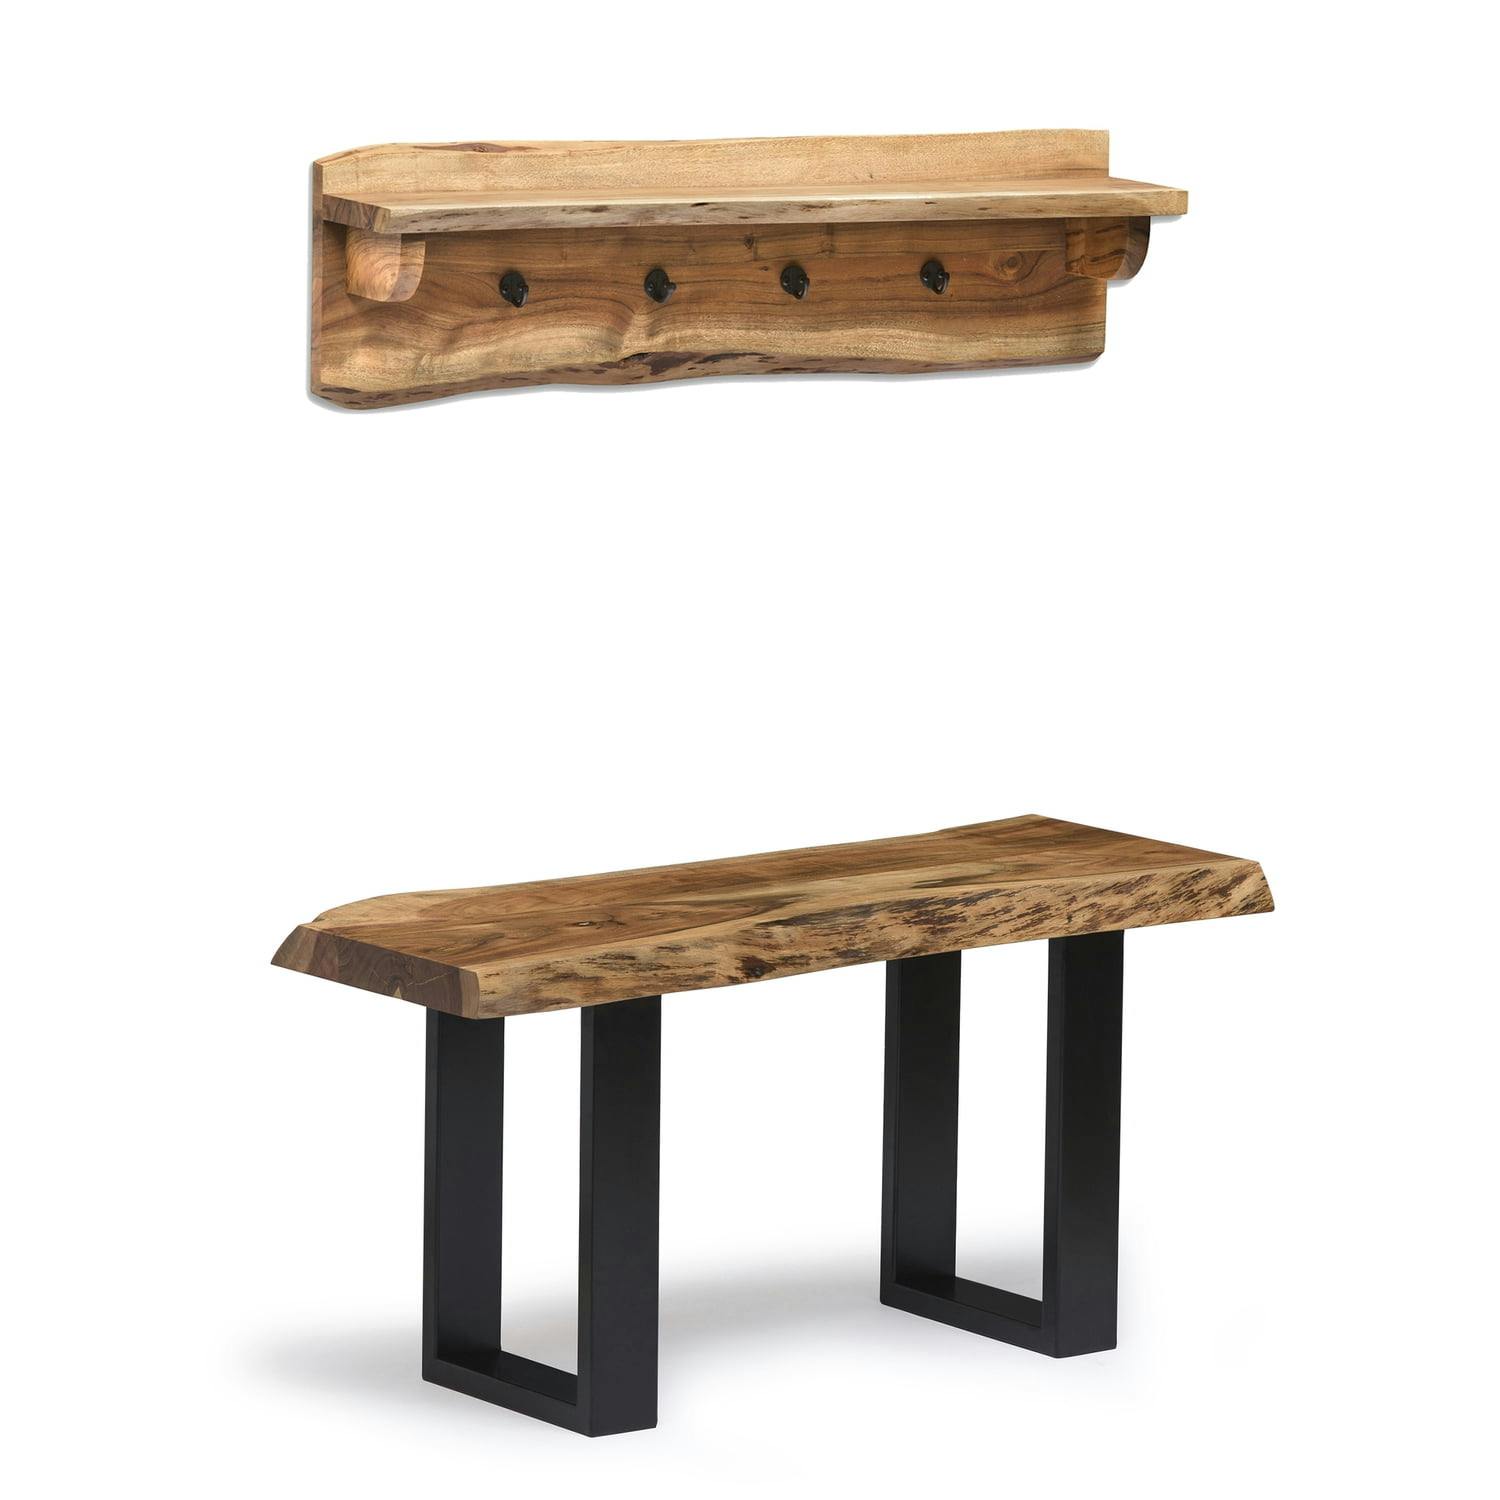 Alpine Natural Acacia Wood 39" Bench with Live Edge and Metal Coat Hooks